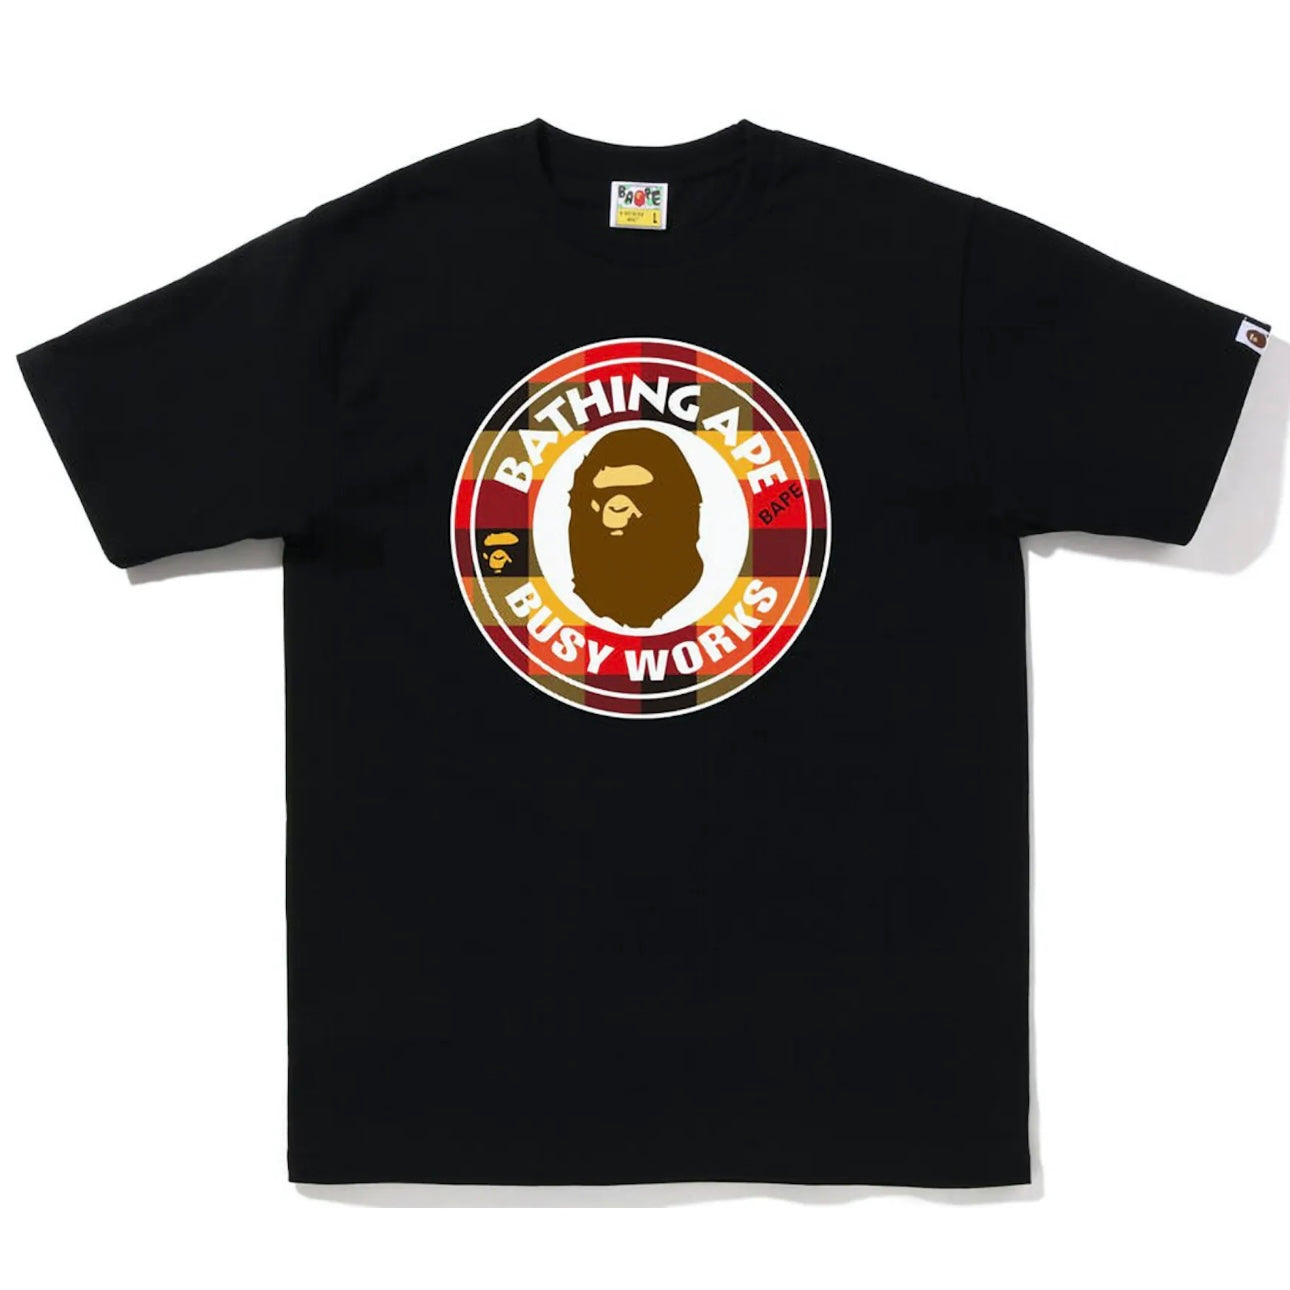 Bape Block Check Busy Works Tee “Black/Red”